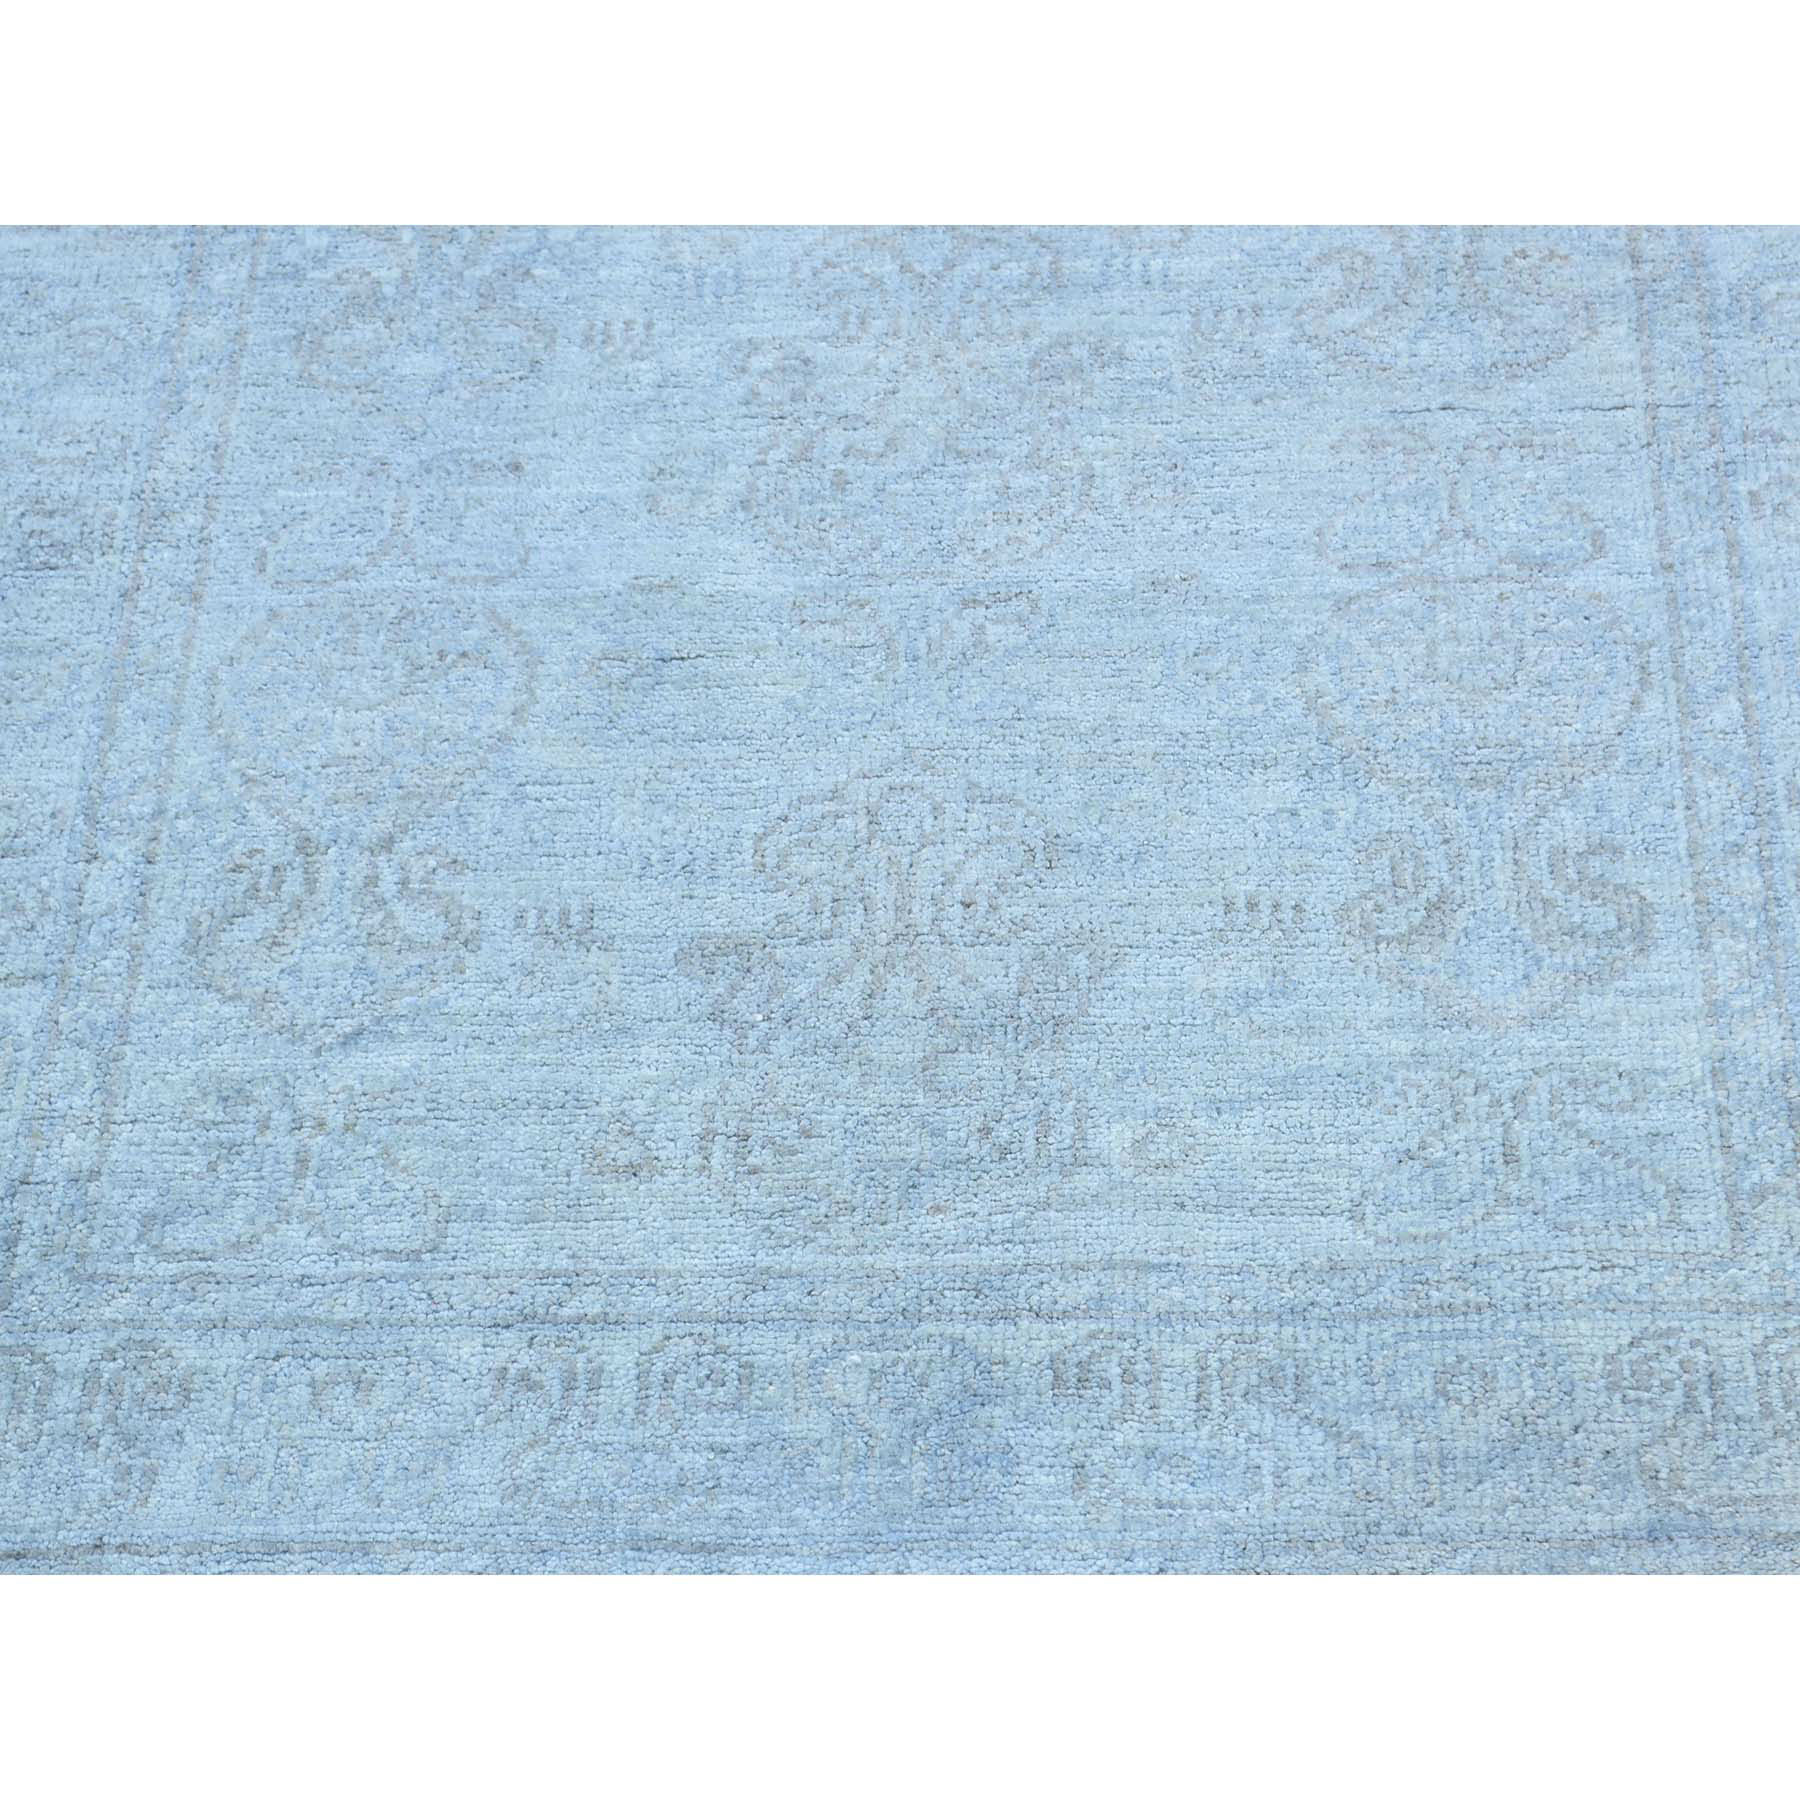 2-6 x9-7  Hand Knotted Silver Wash Peshawar Pure Wool Runner Oriental Rug 